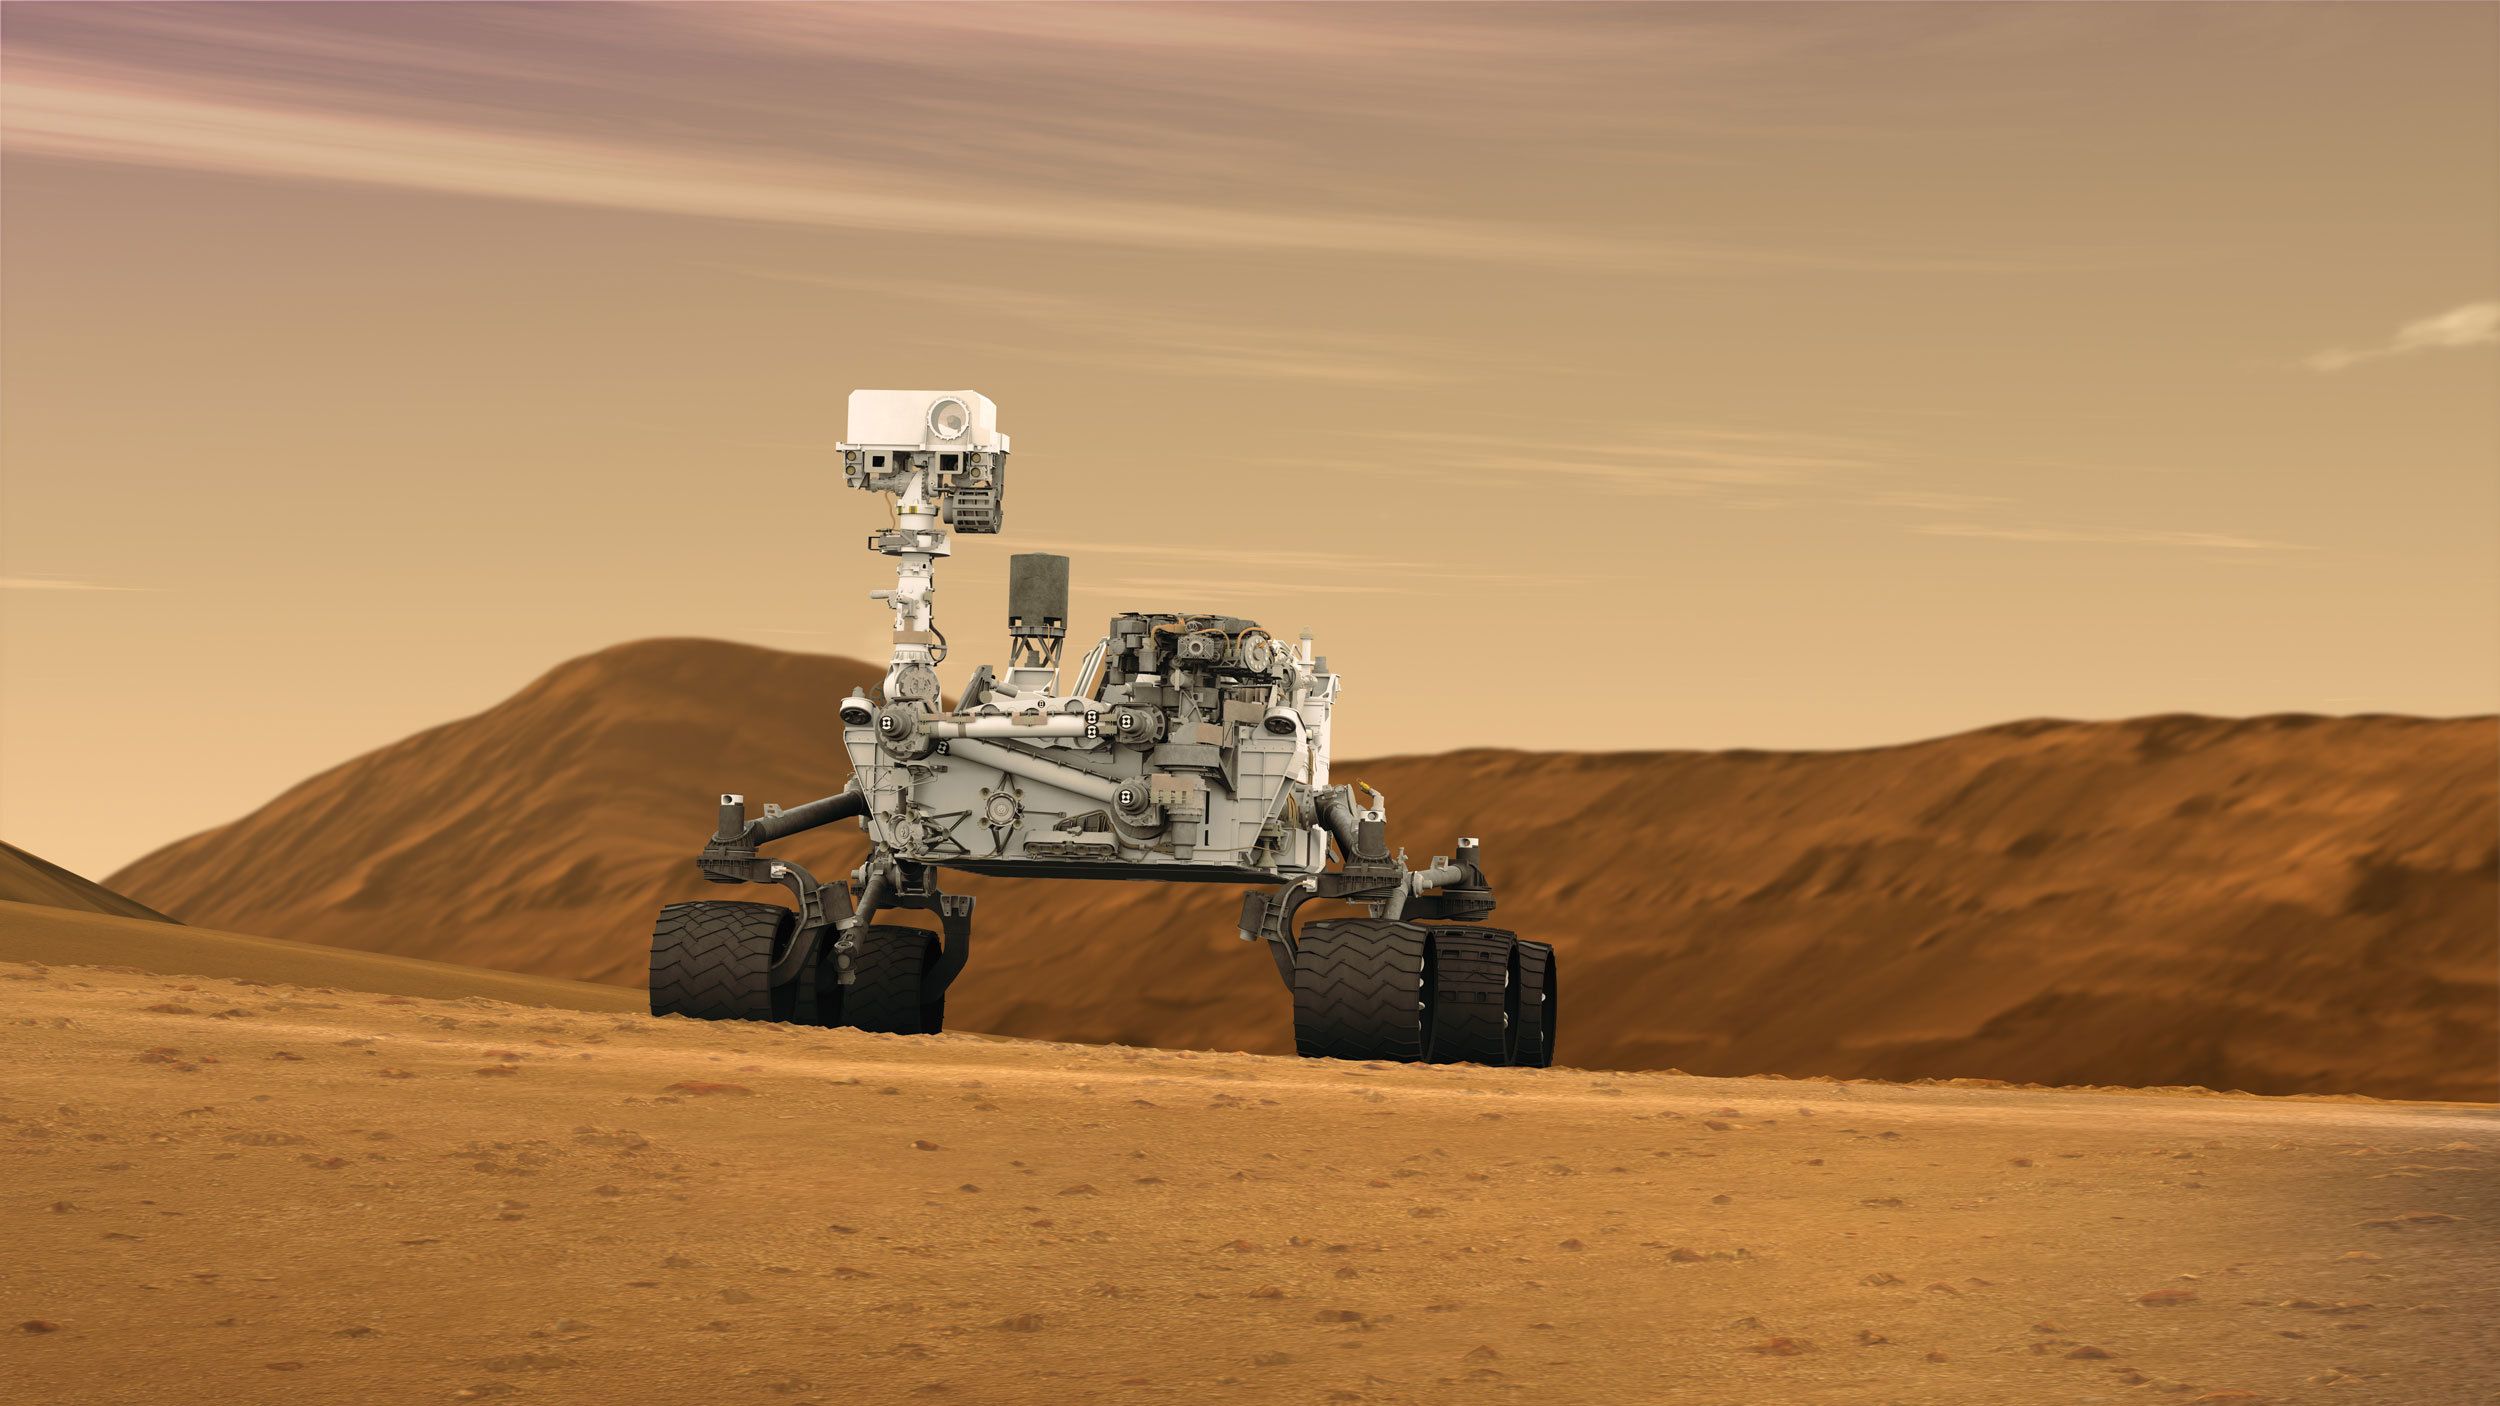 The Mars Rover is a mobile robot, designed to terrain across planet Mars to collect data. Photo credit: mars.jpl.nasa.gov